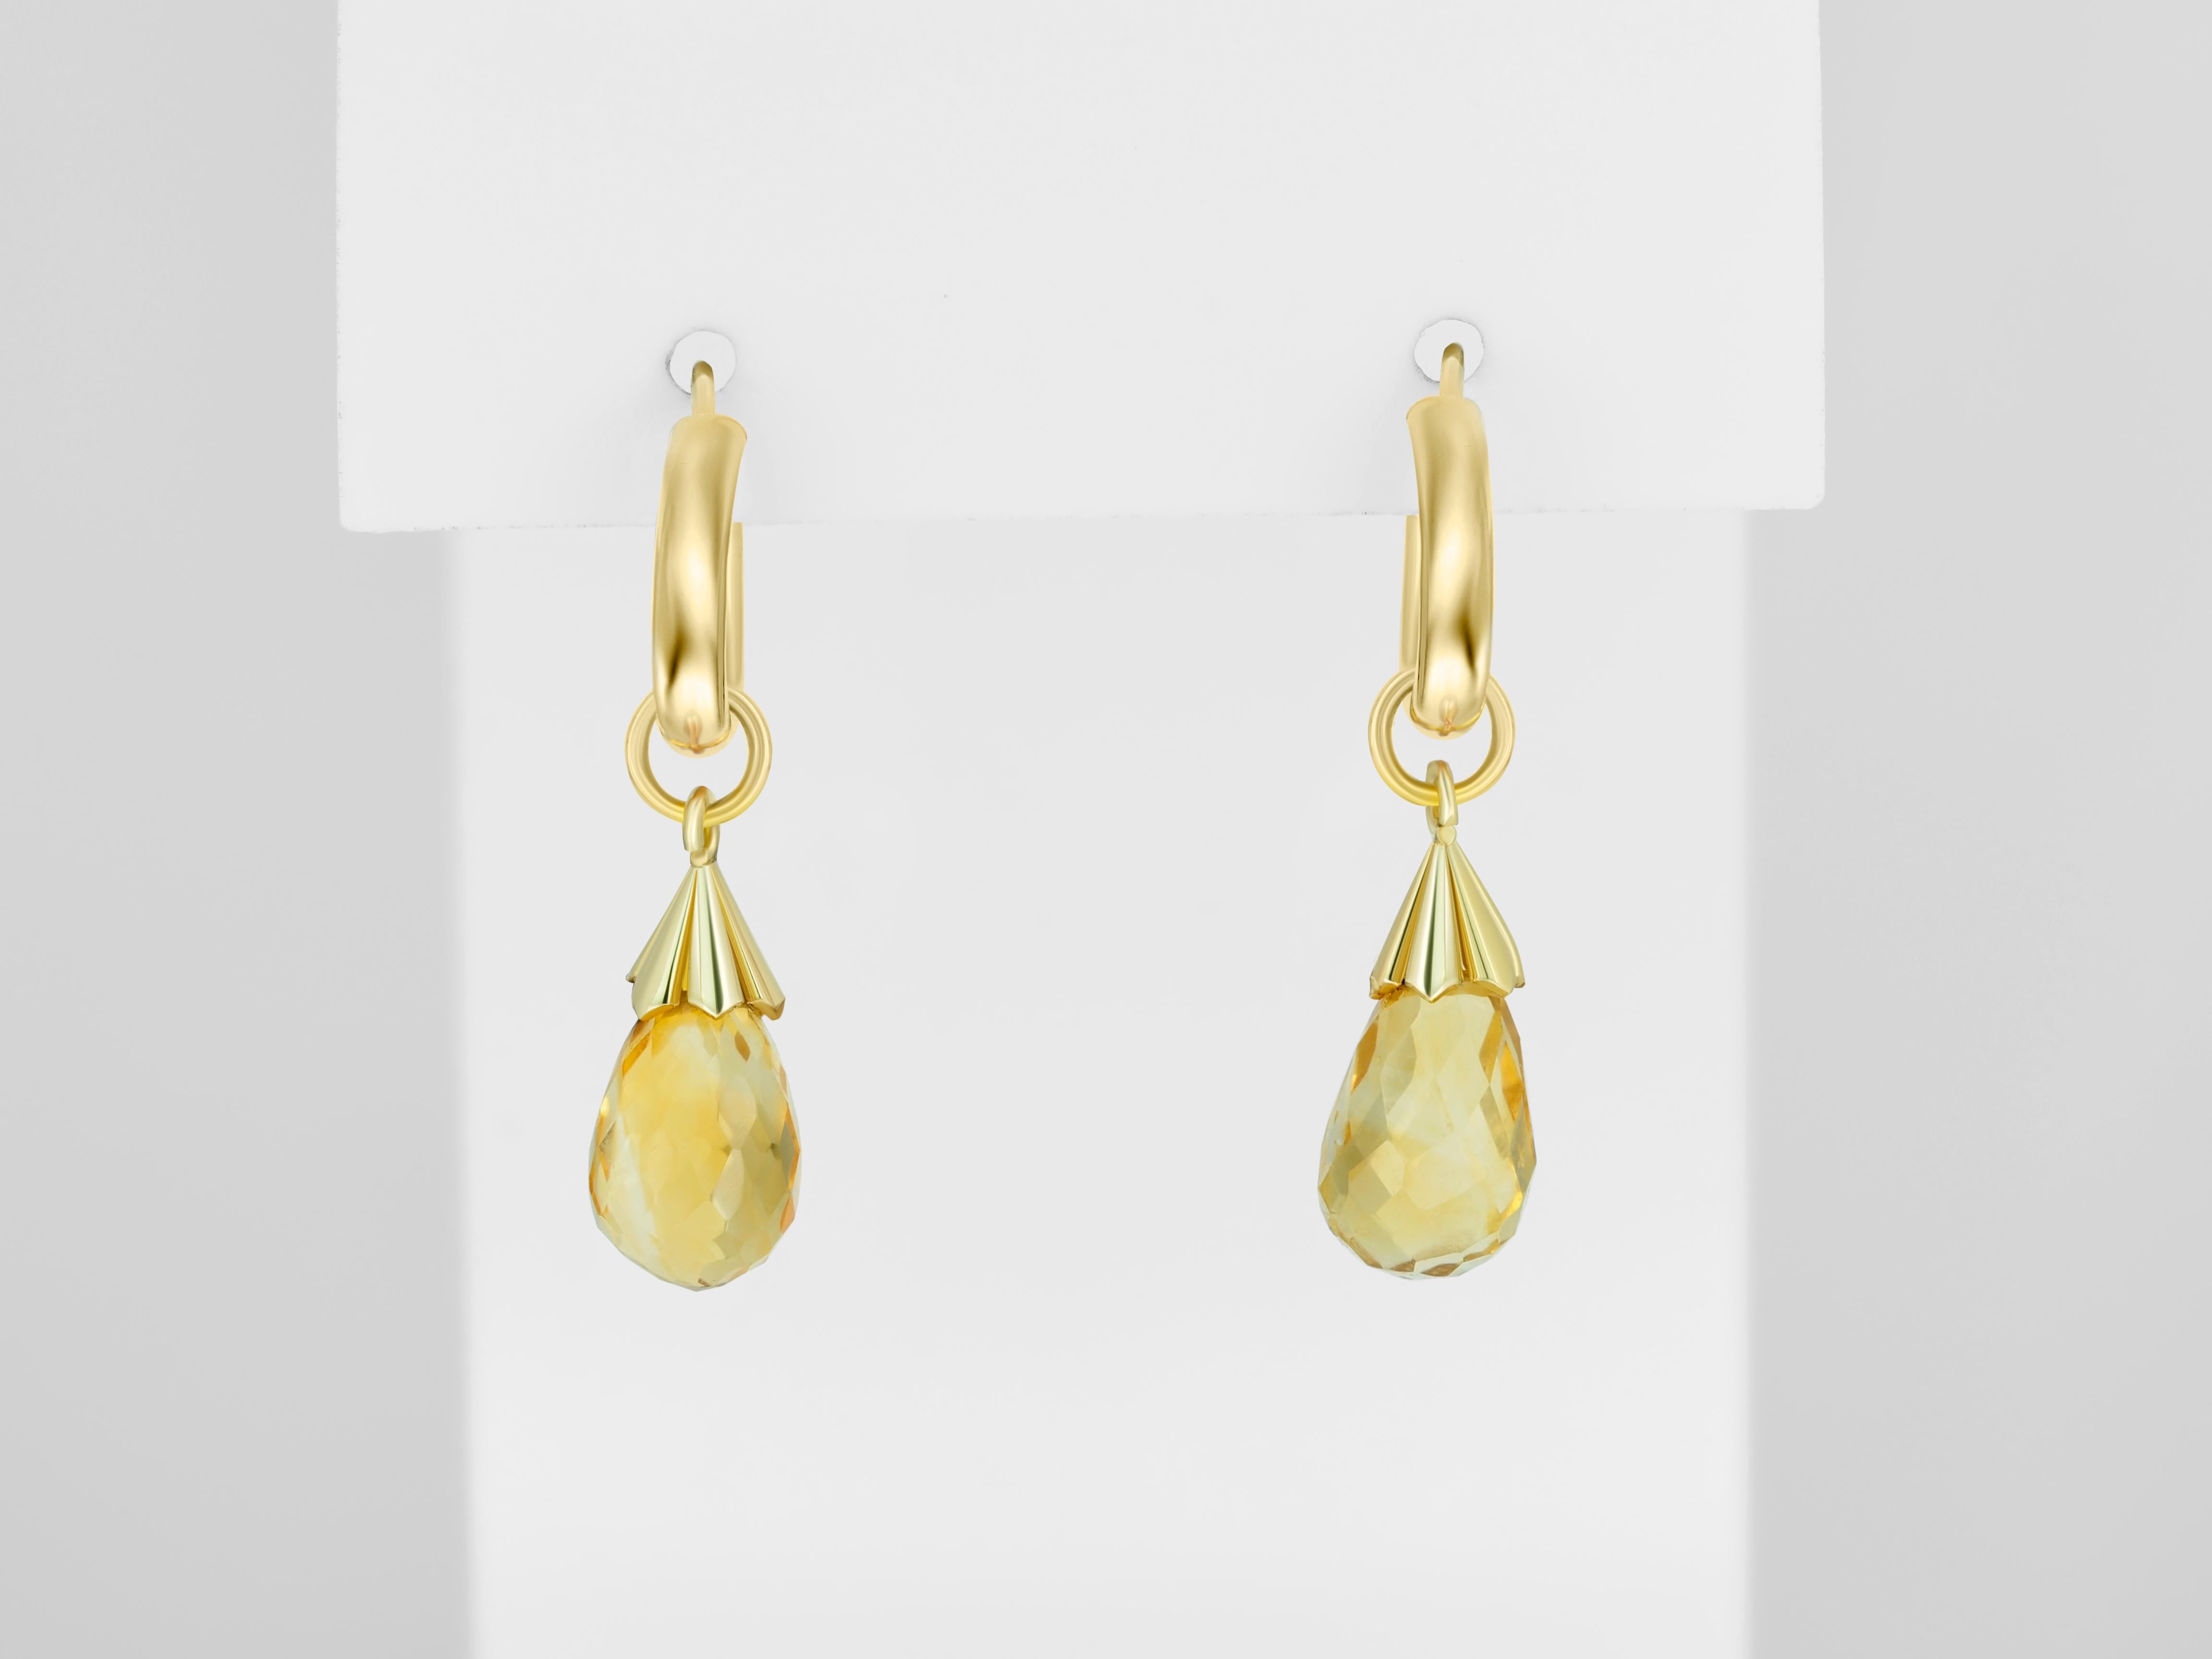 Modern Hoop Earrings and Citrine Briolette Charms in 14k Gold For Sale